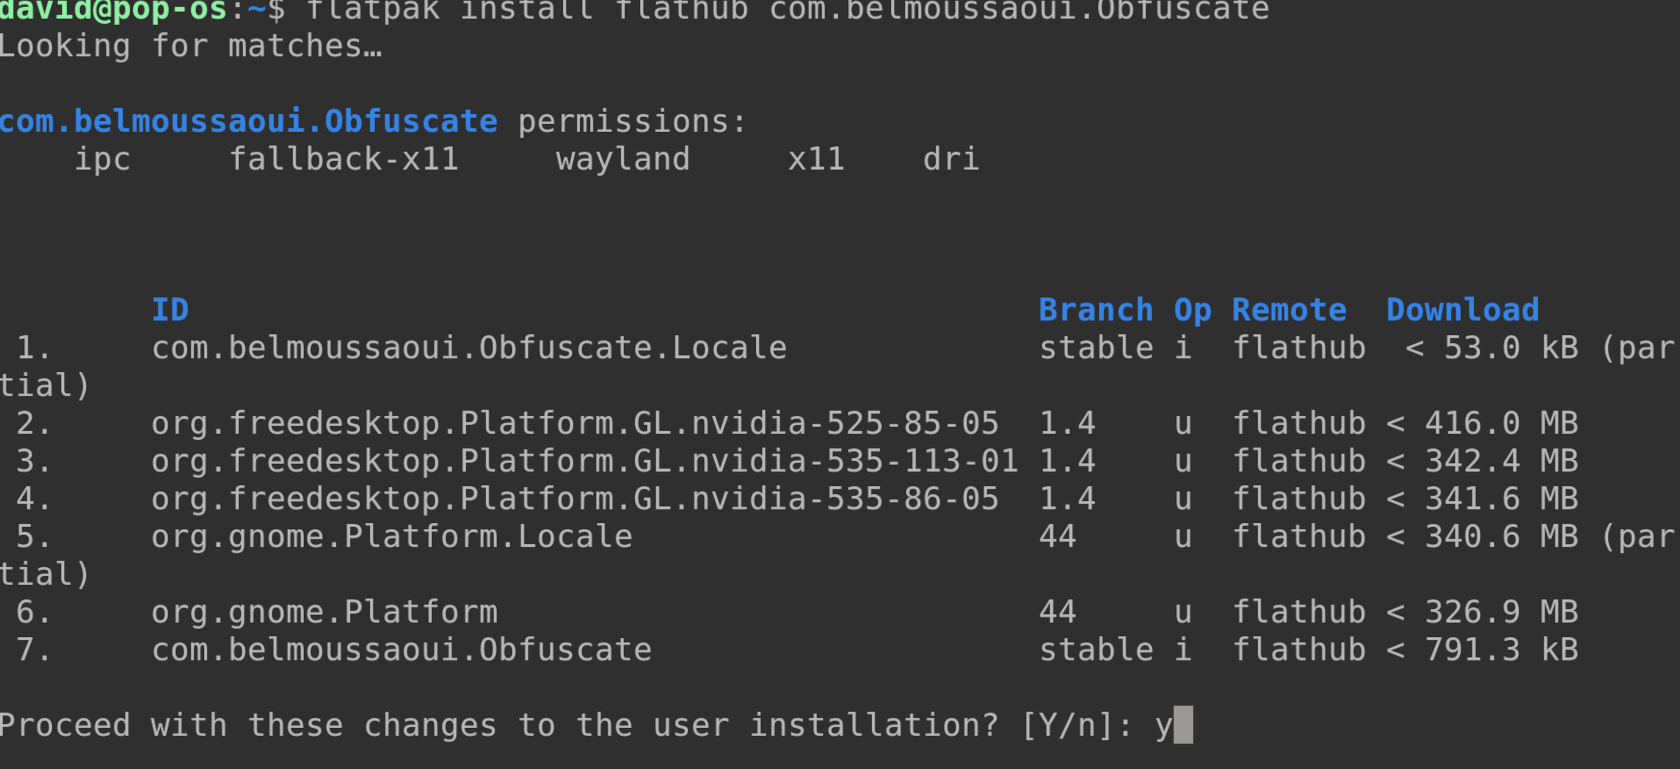 Linux terminal showing a monster download to install the Obfuscate flatpak